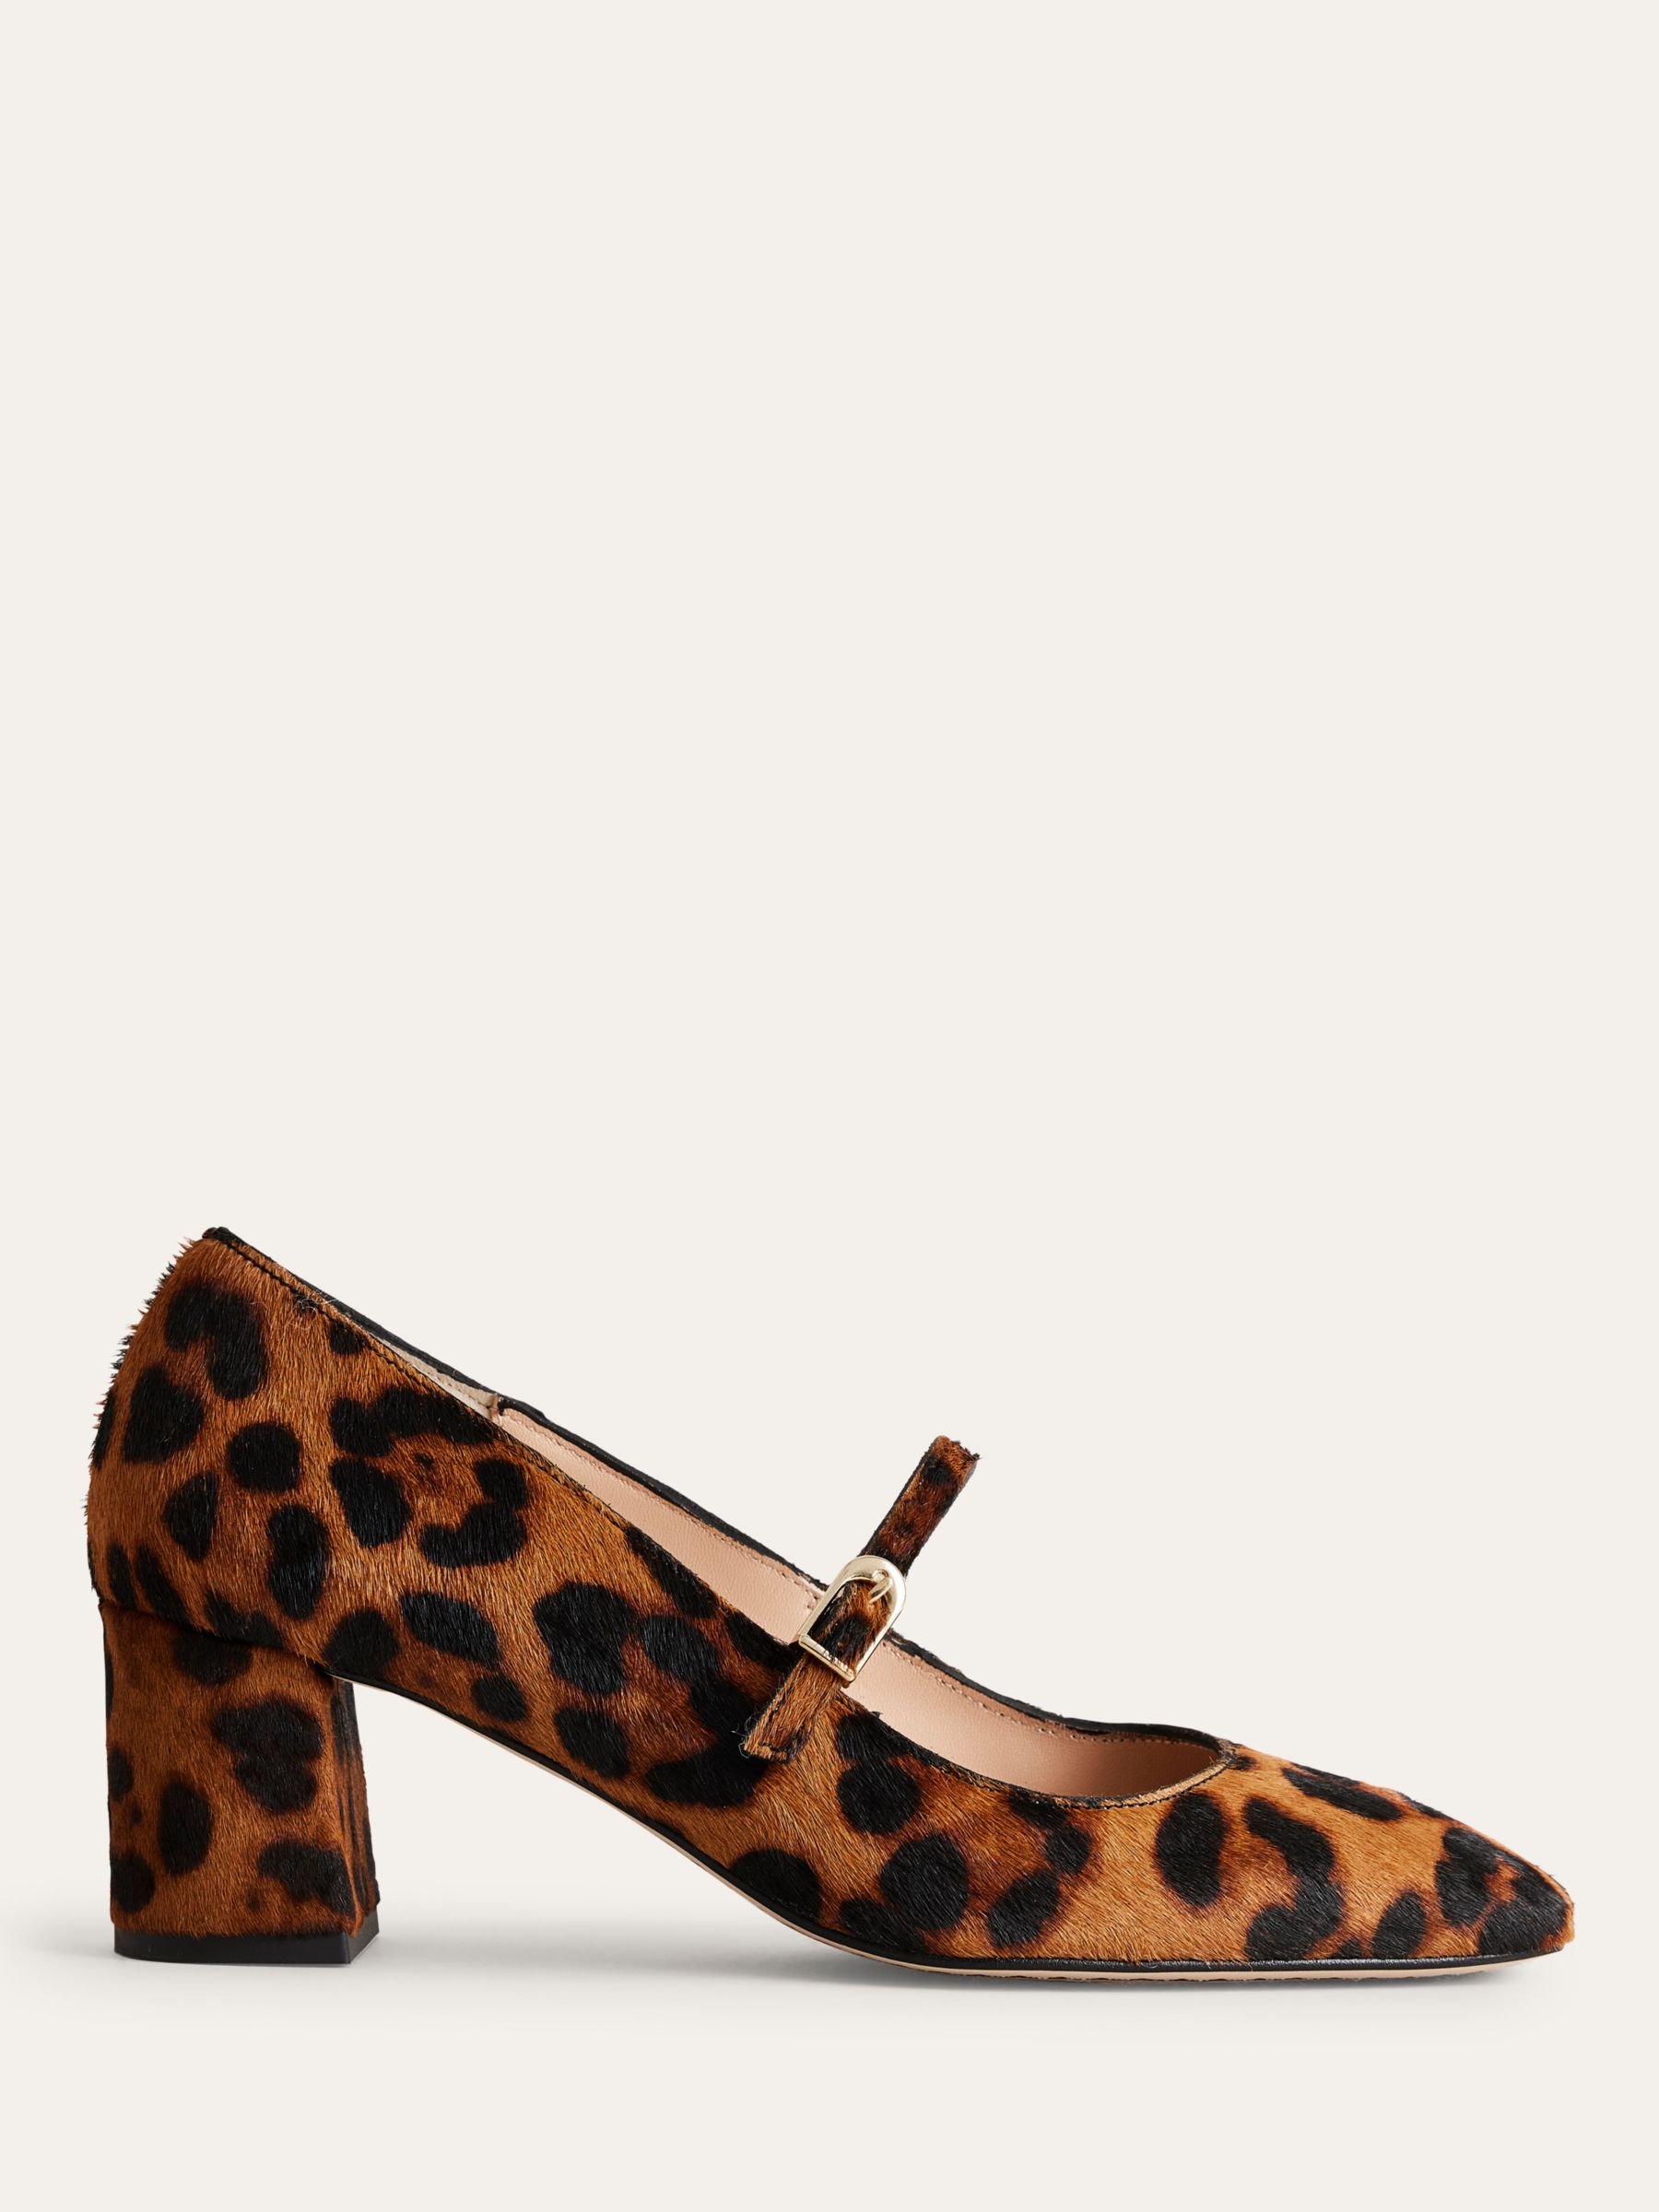 Boden Mary Jane Block Heel Shoes, Classic Leopard Pony, 4